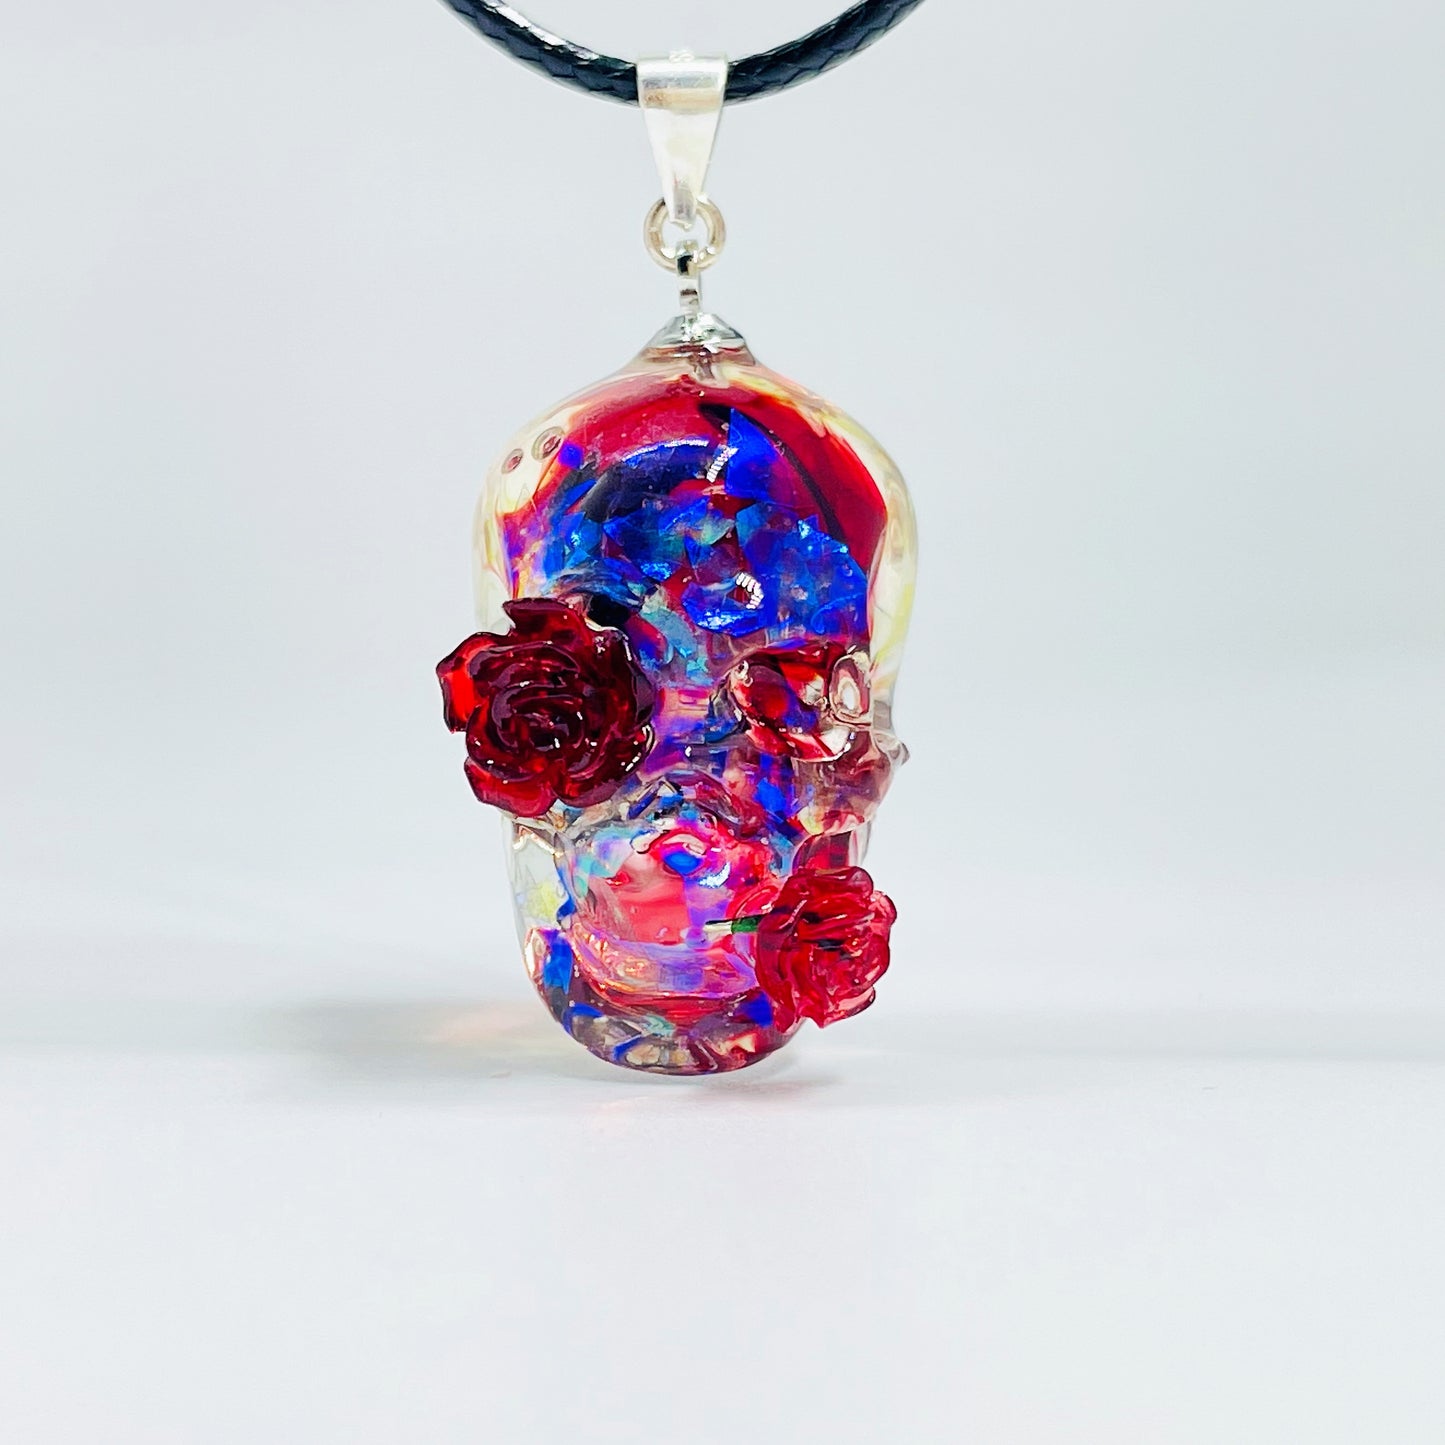 A Personality Gothic Halloween Gift Necklace Lovers with red and blue flowers on it by Maramalive™.